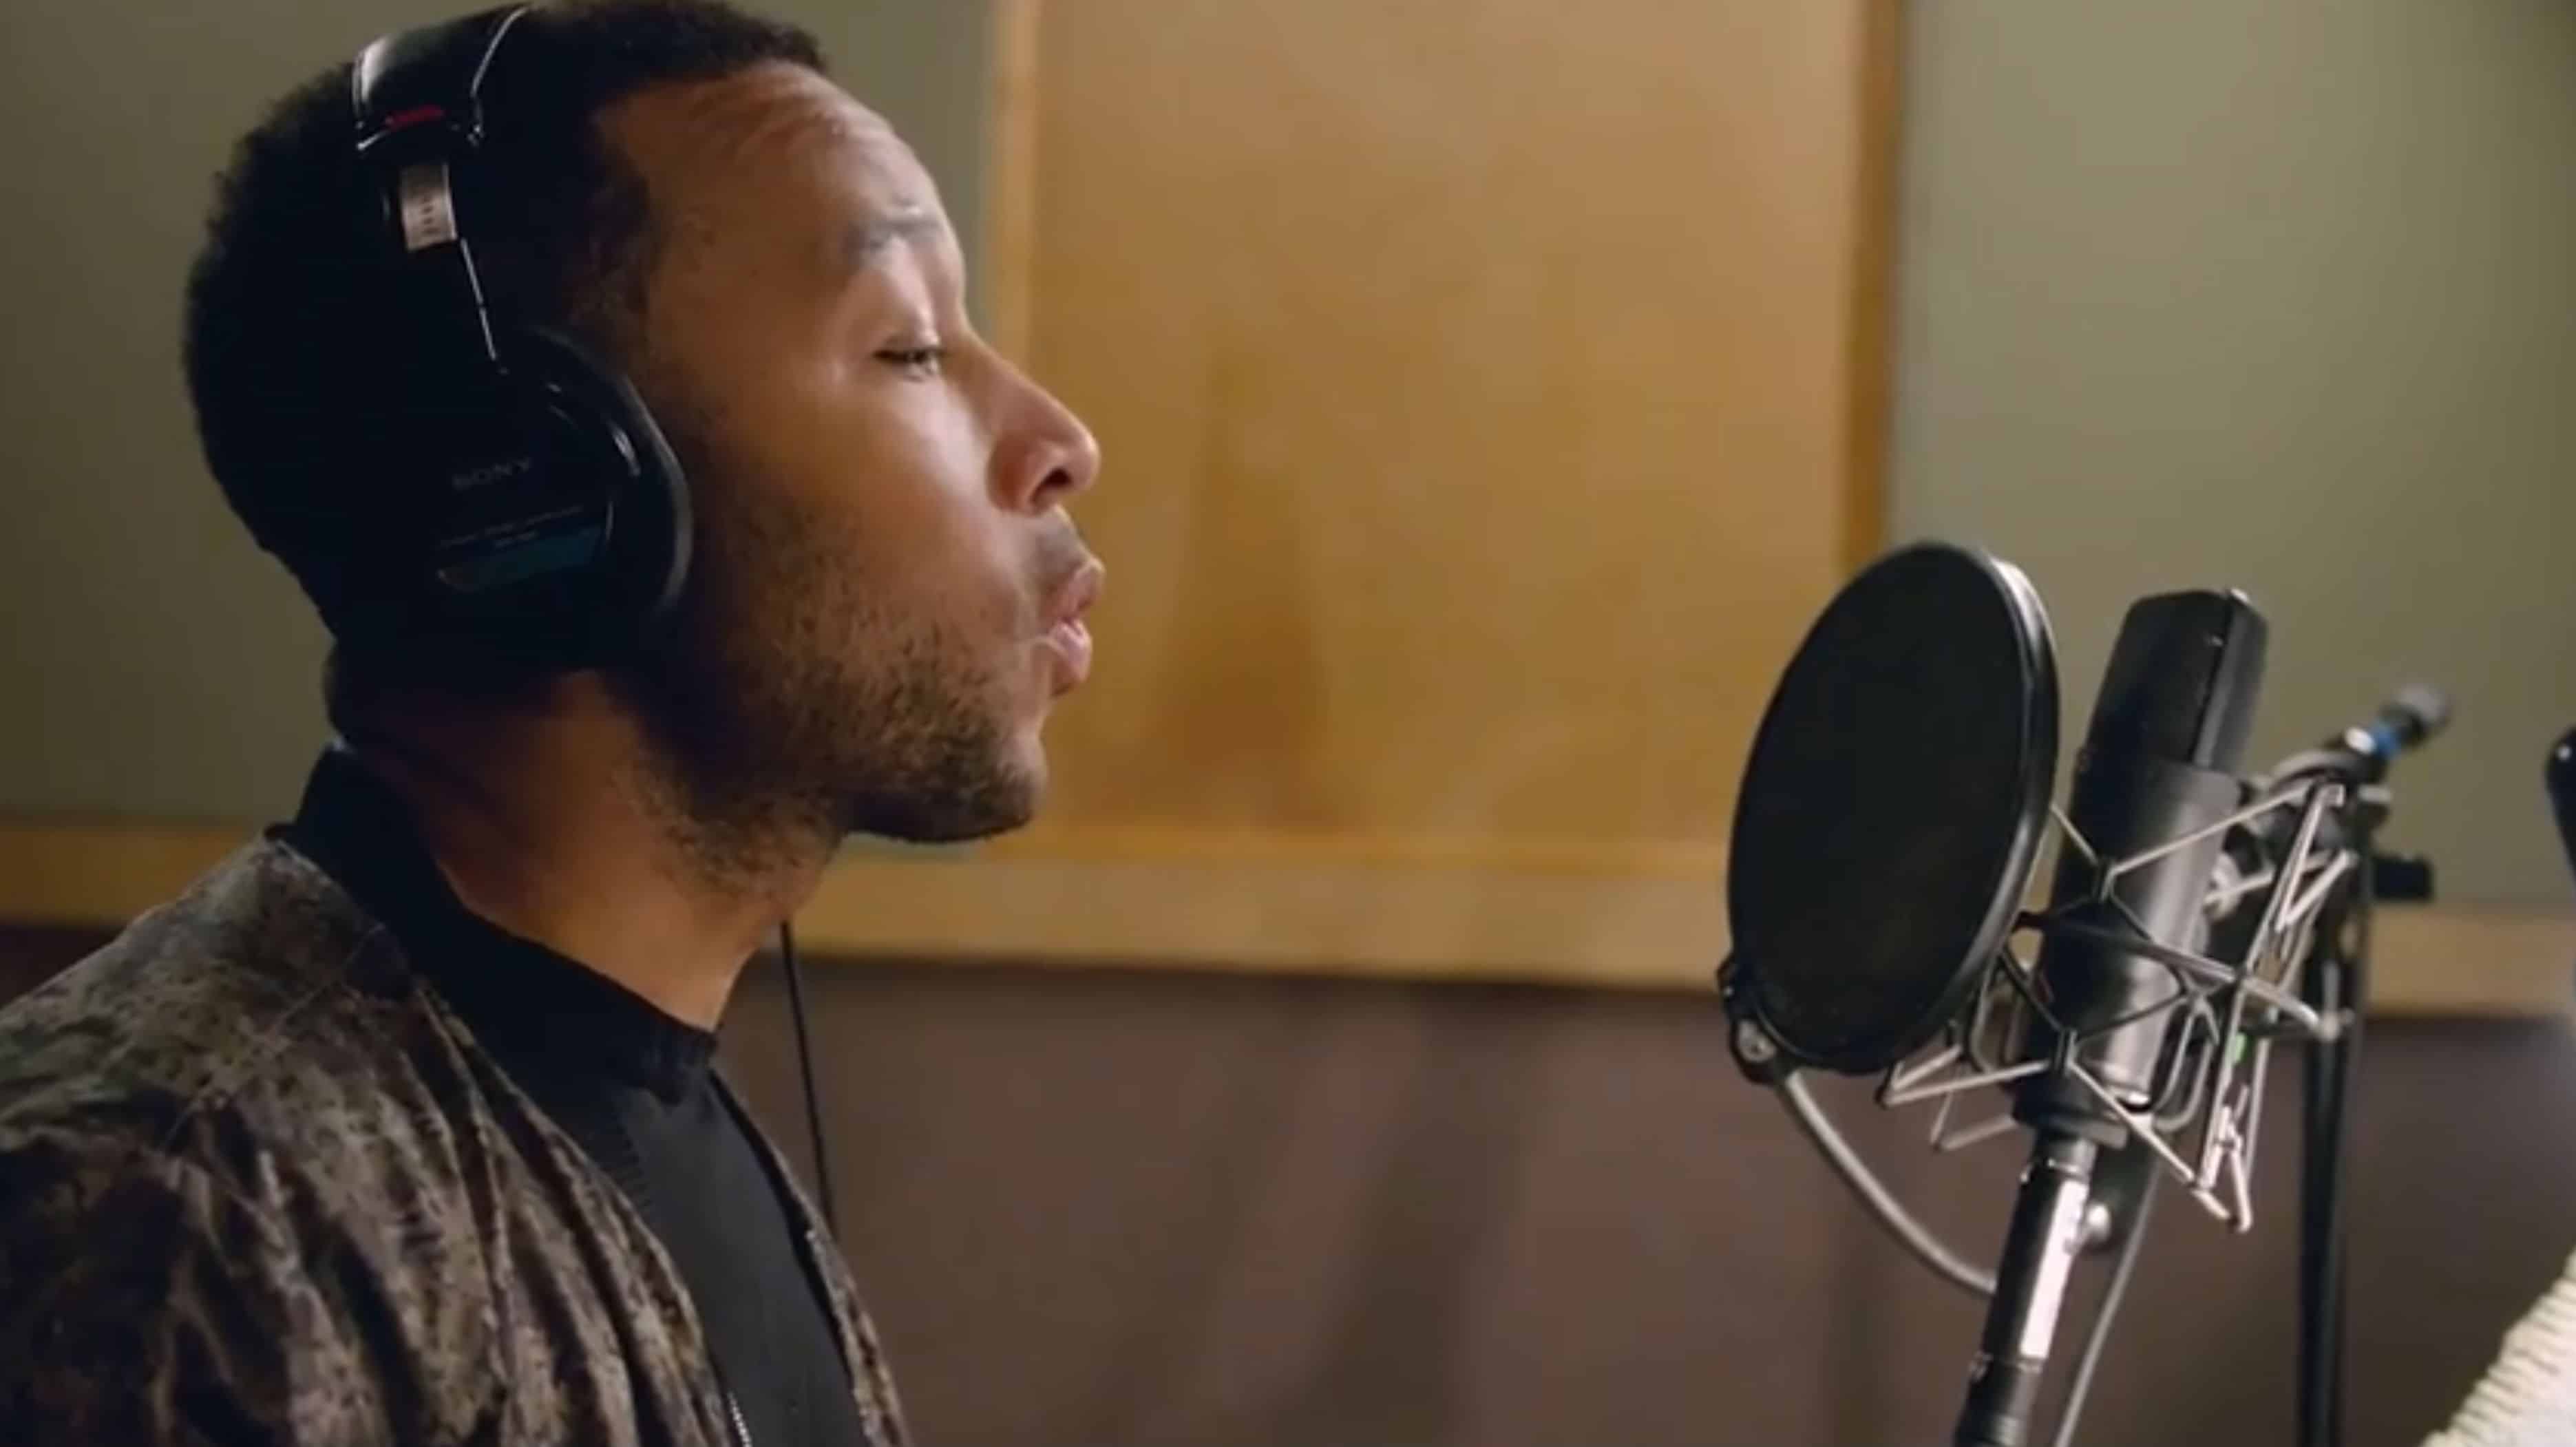 A demo from Google I/O shows John Legend recording his voice, which is coming soon to Google Assistant.